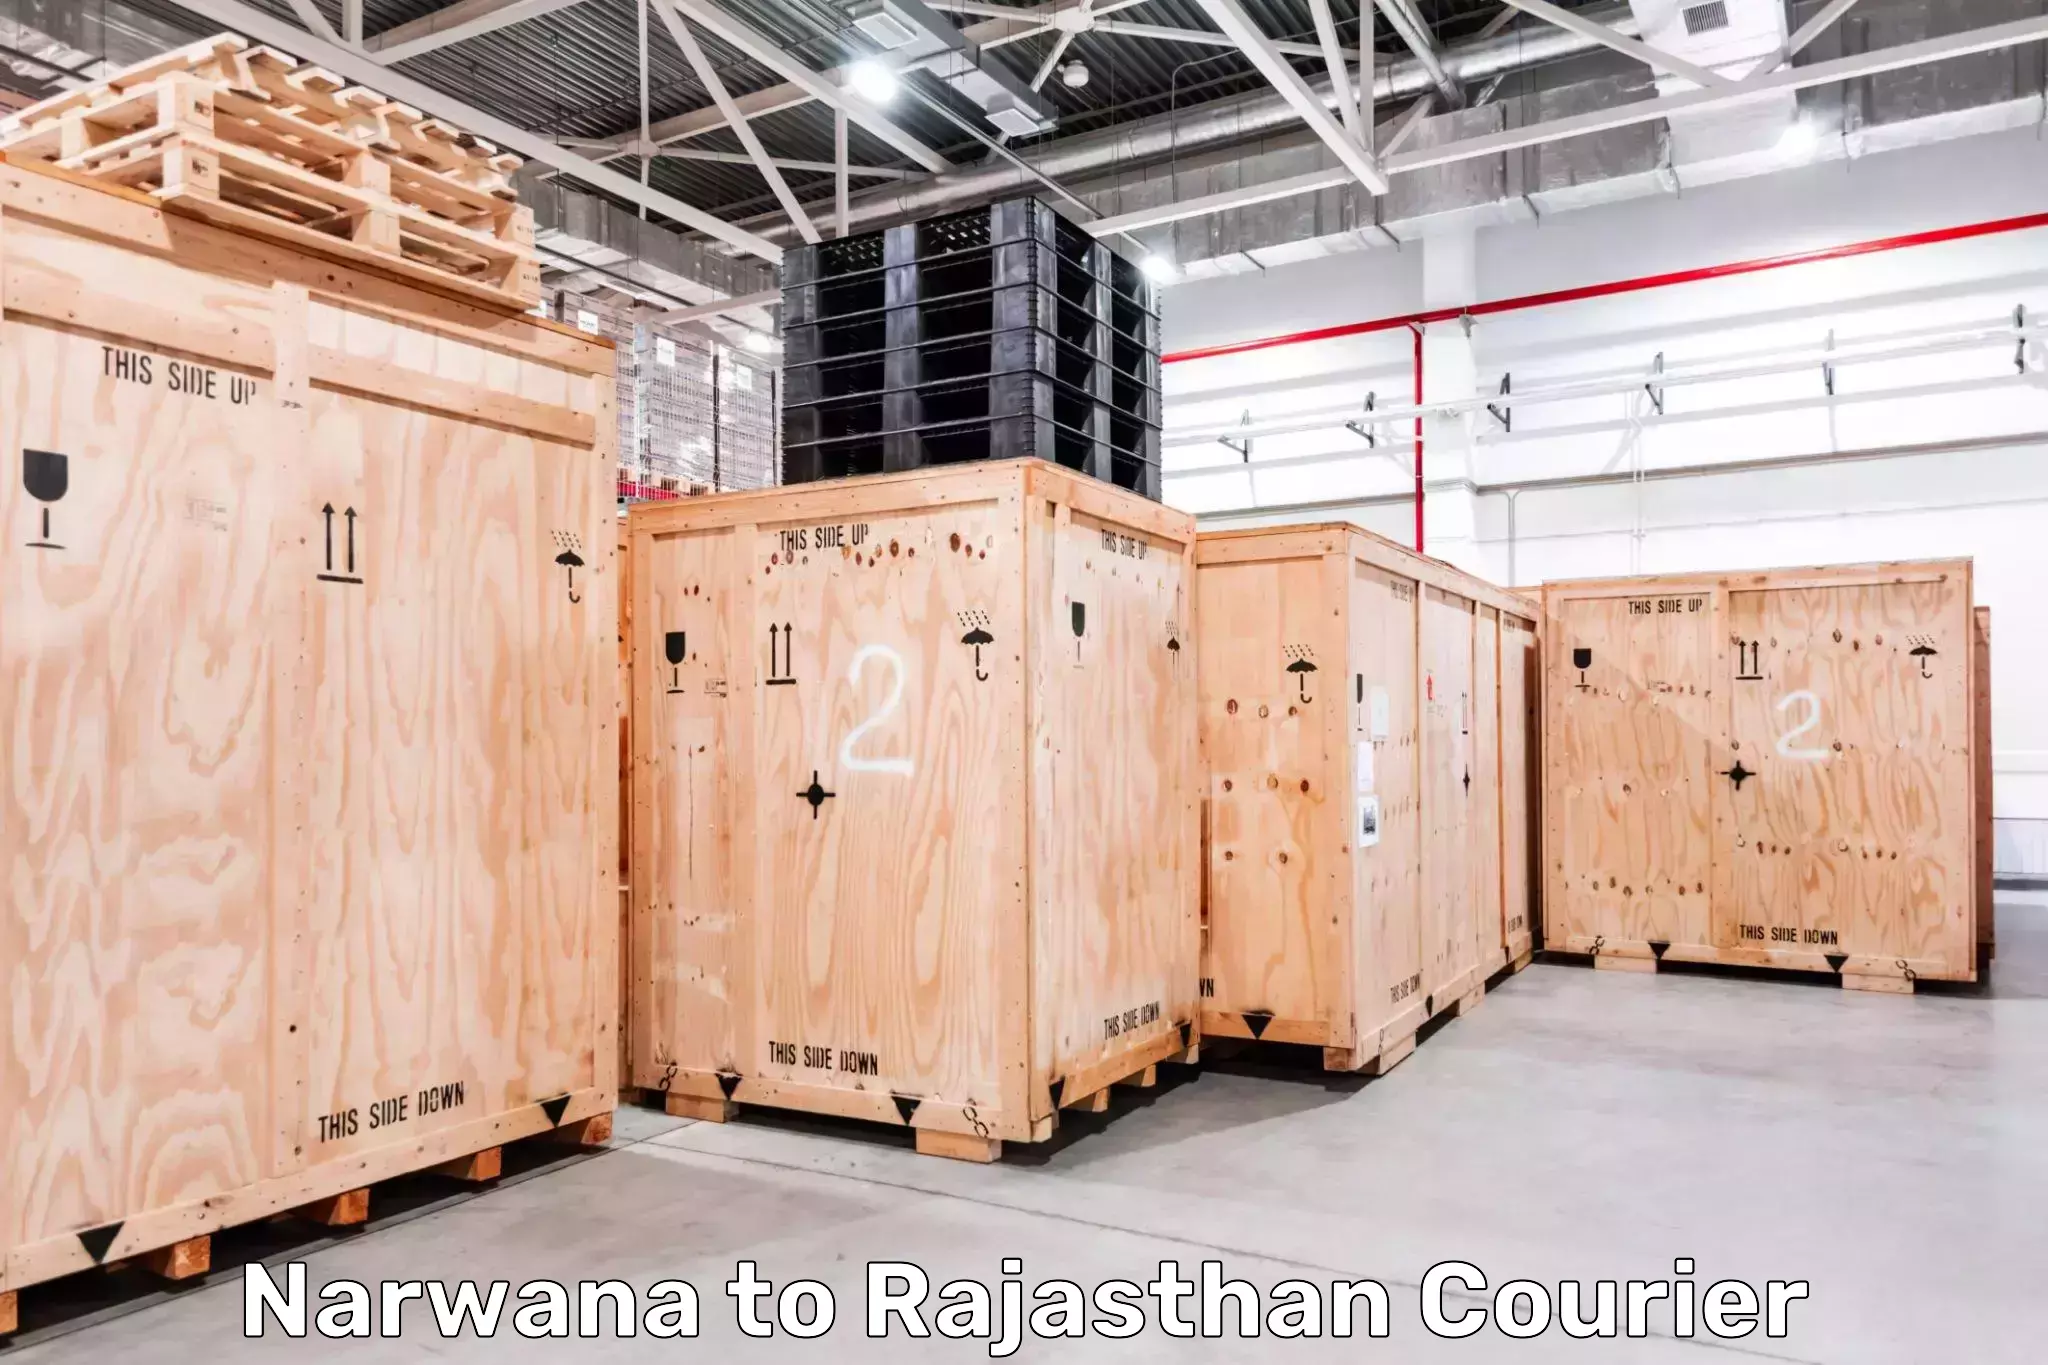 Reliable delivery network Narwana to Pokhran